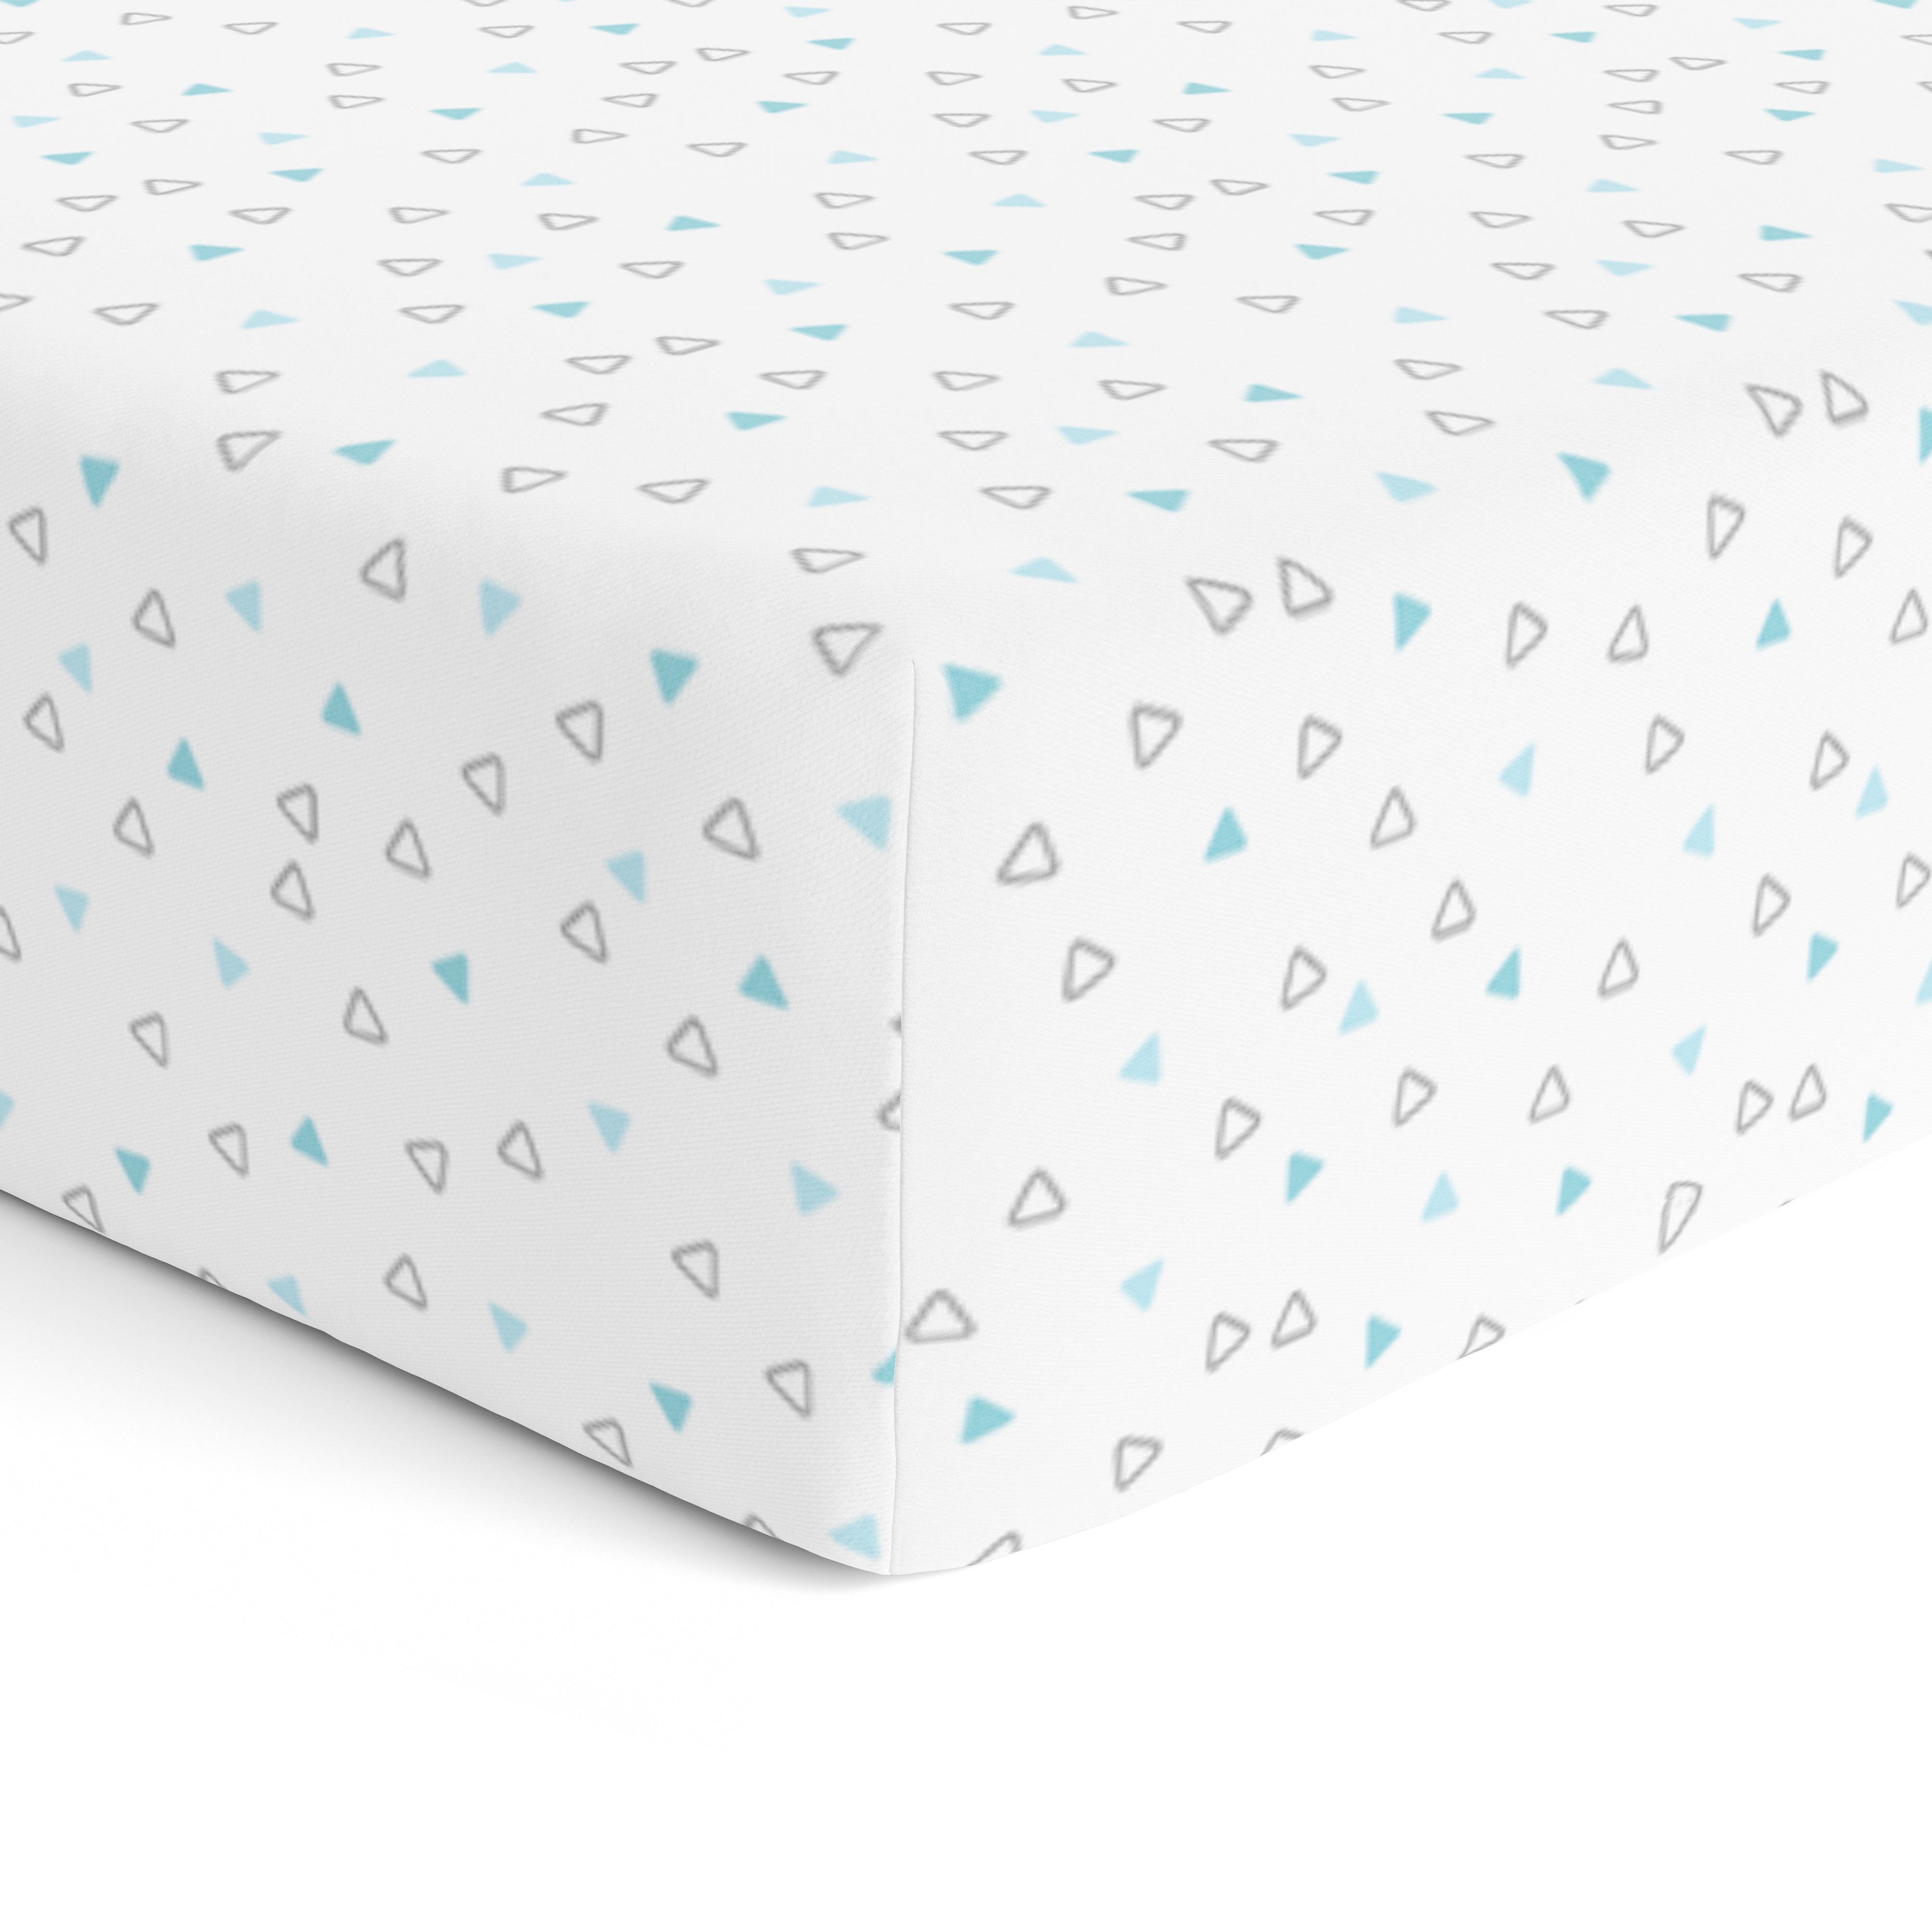 The White Cradle Pure Organic Cotton Fitted Cot Sheet for Baby Crib 24 x 48 inch - Blue Triangles (Medium)